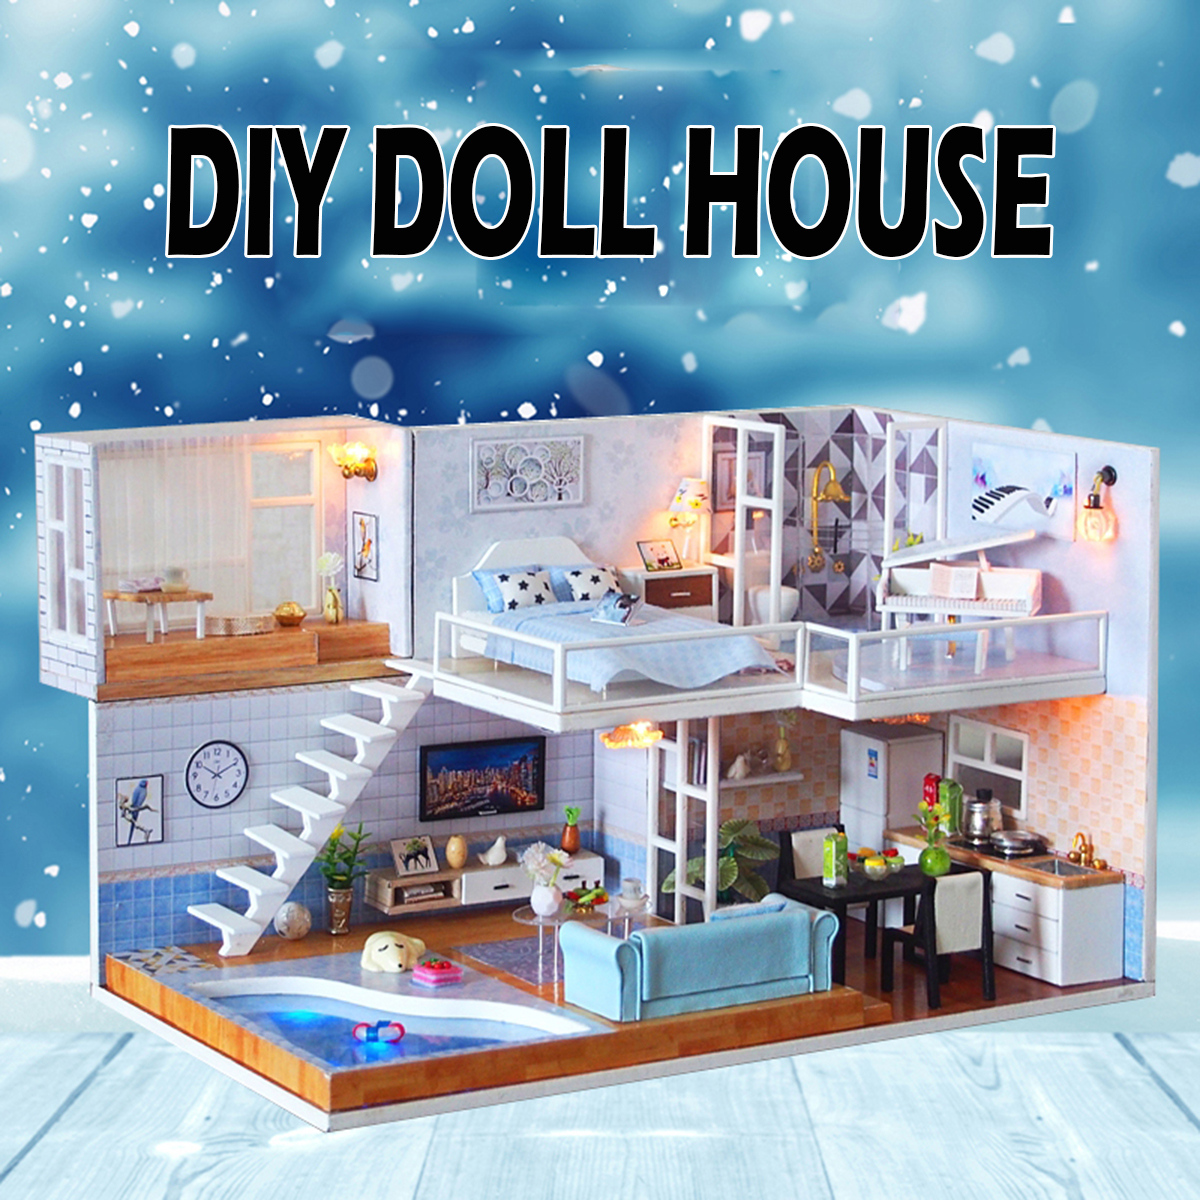 Modern Dollhouse Kit For Adults